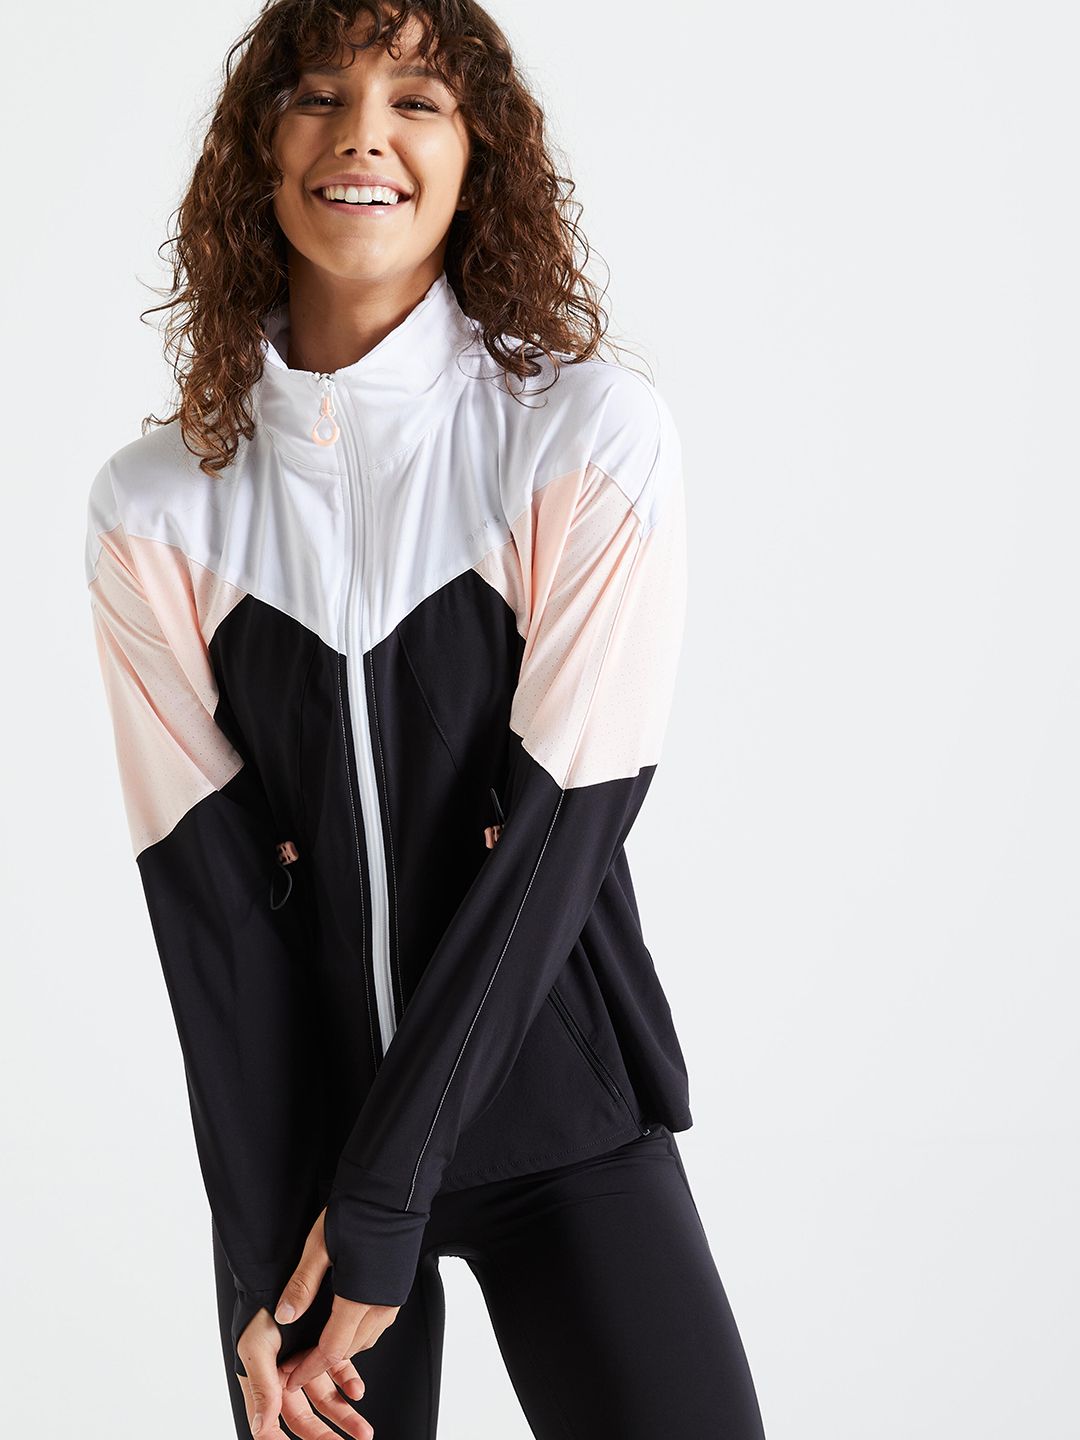 Domyos By Decathlon Women White & Pink Colourblocked Training or Gym Sporty Jacket Price in India